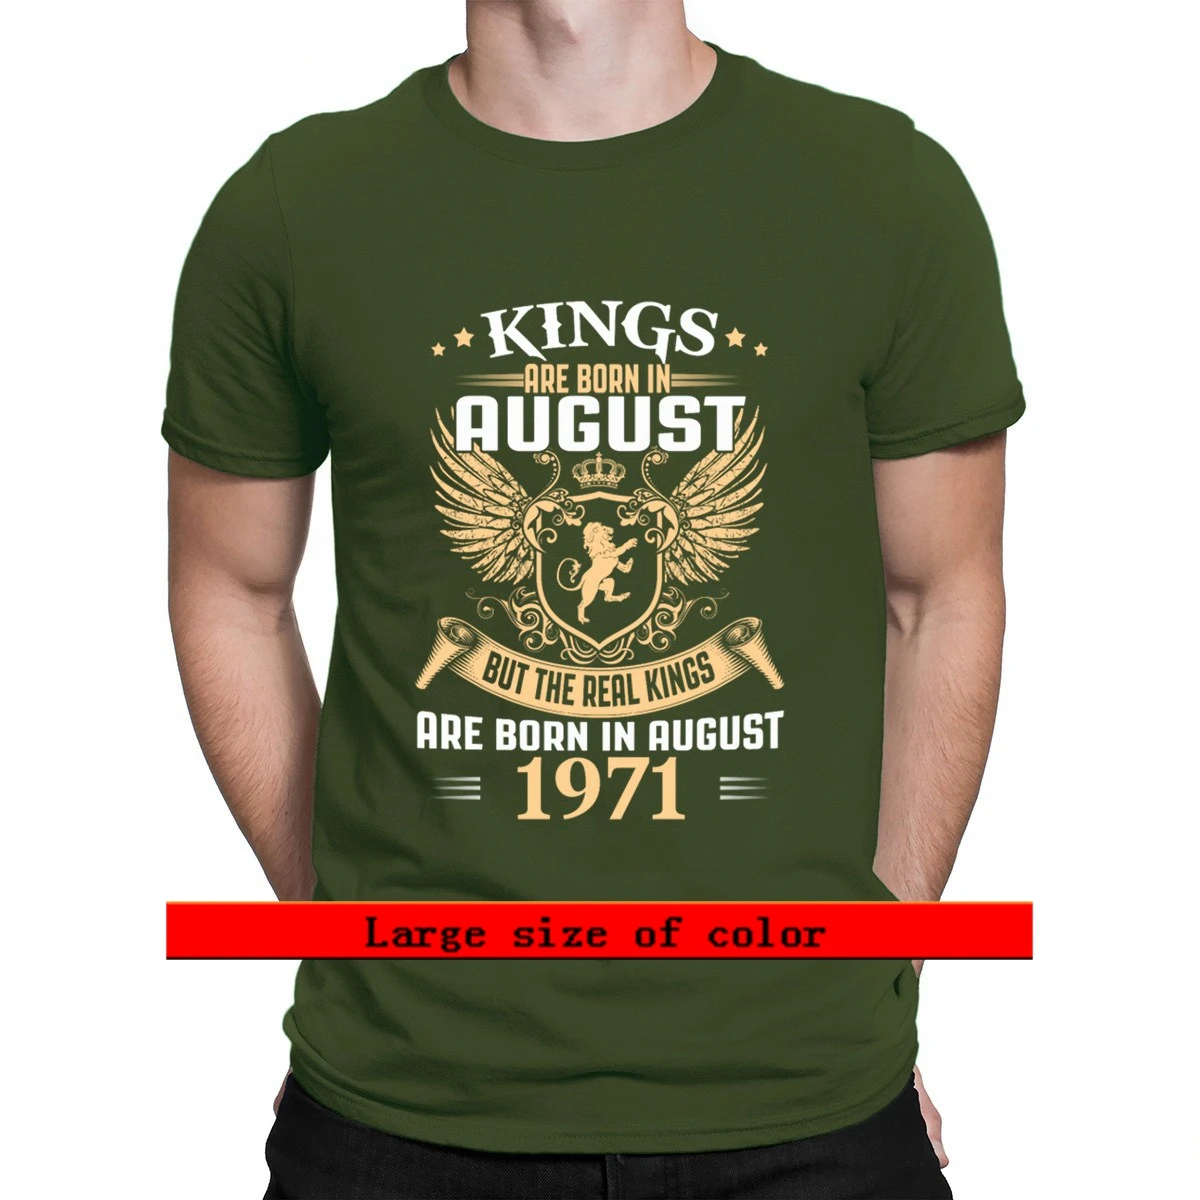 

Kings Legends Are Born In August 1971 2021 T Shirt Comical Summer Style Euro Size S-3xl Tee Shirt Designing Slim Family Gift